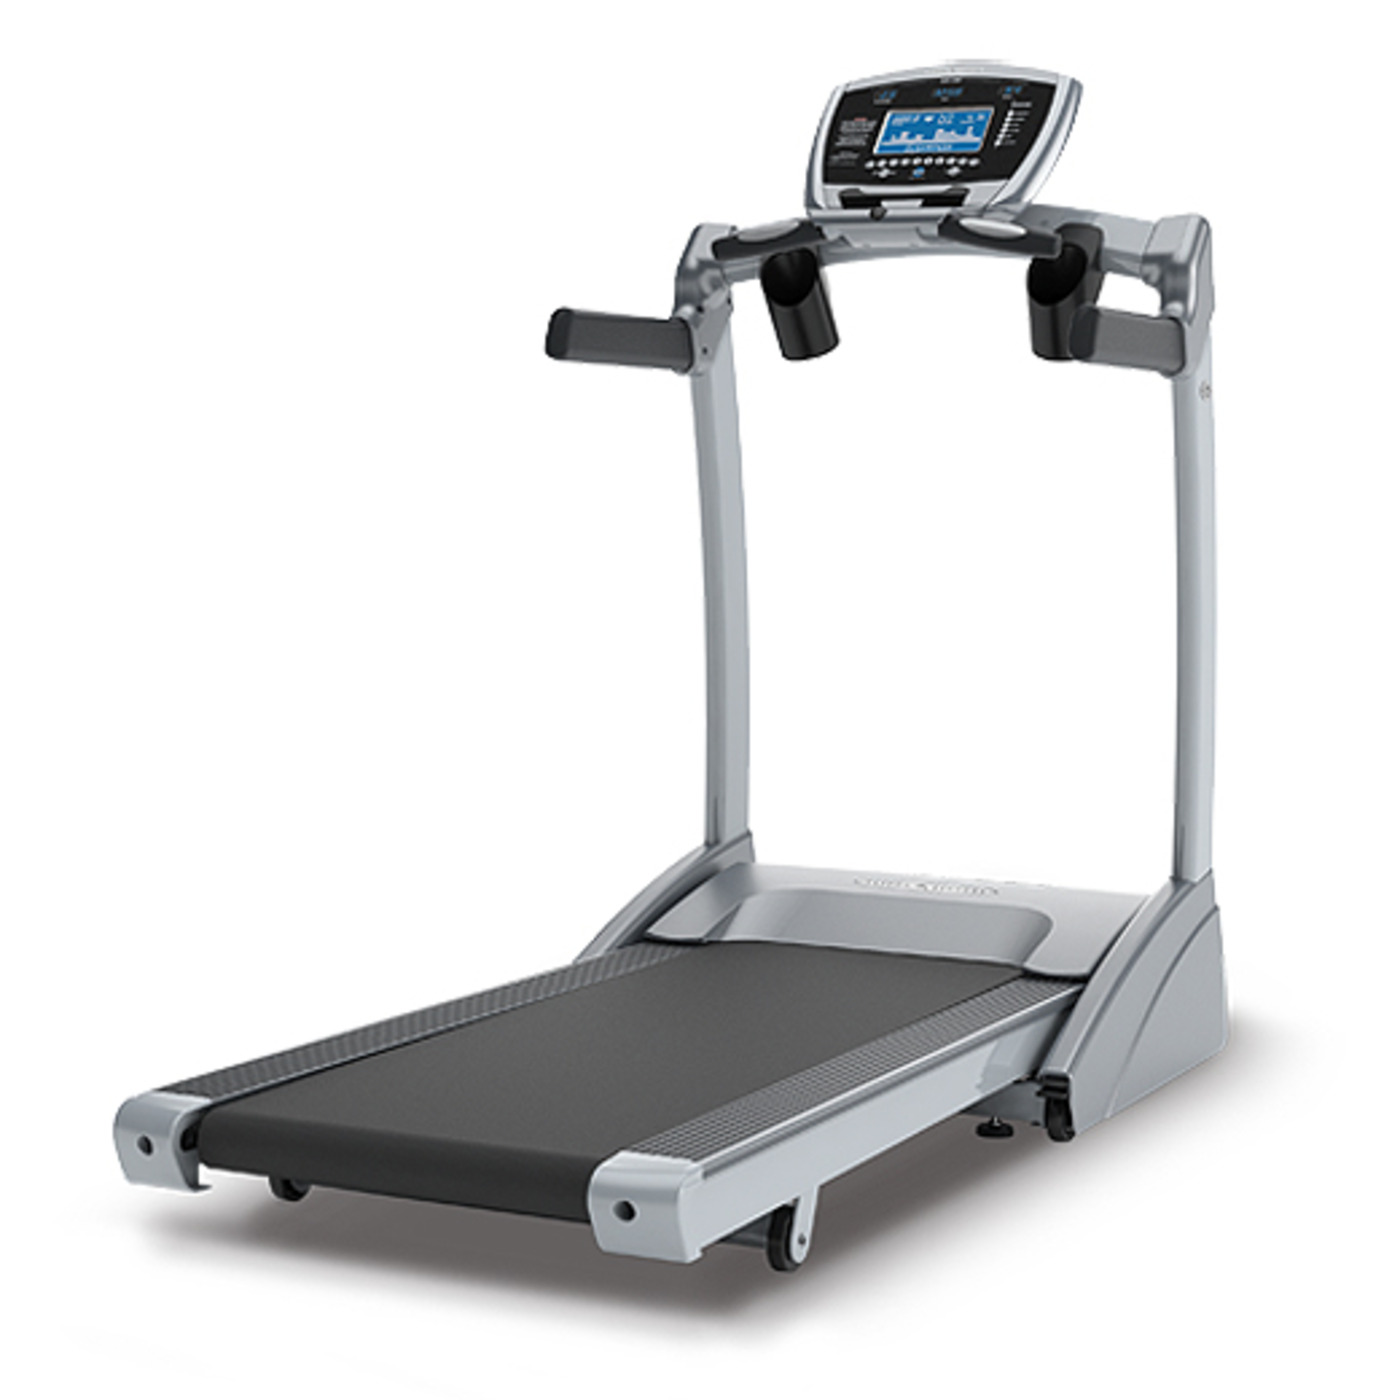 T9550 Treadmill (with New Premier